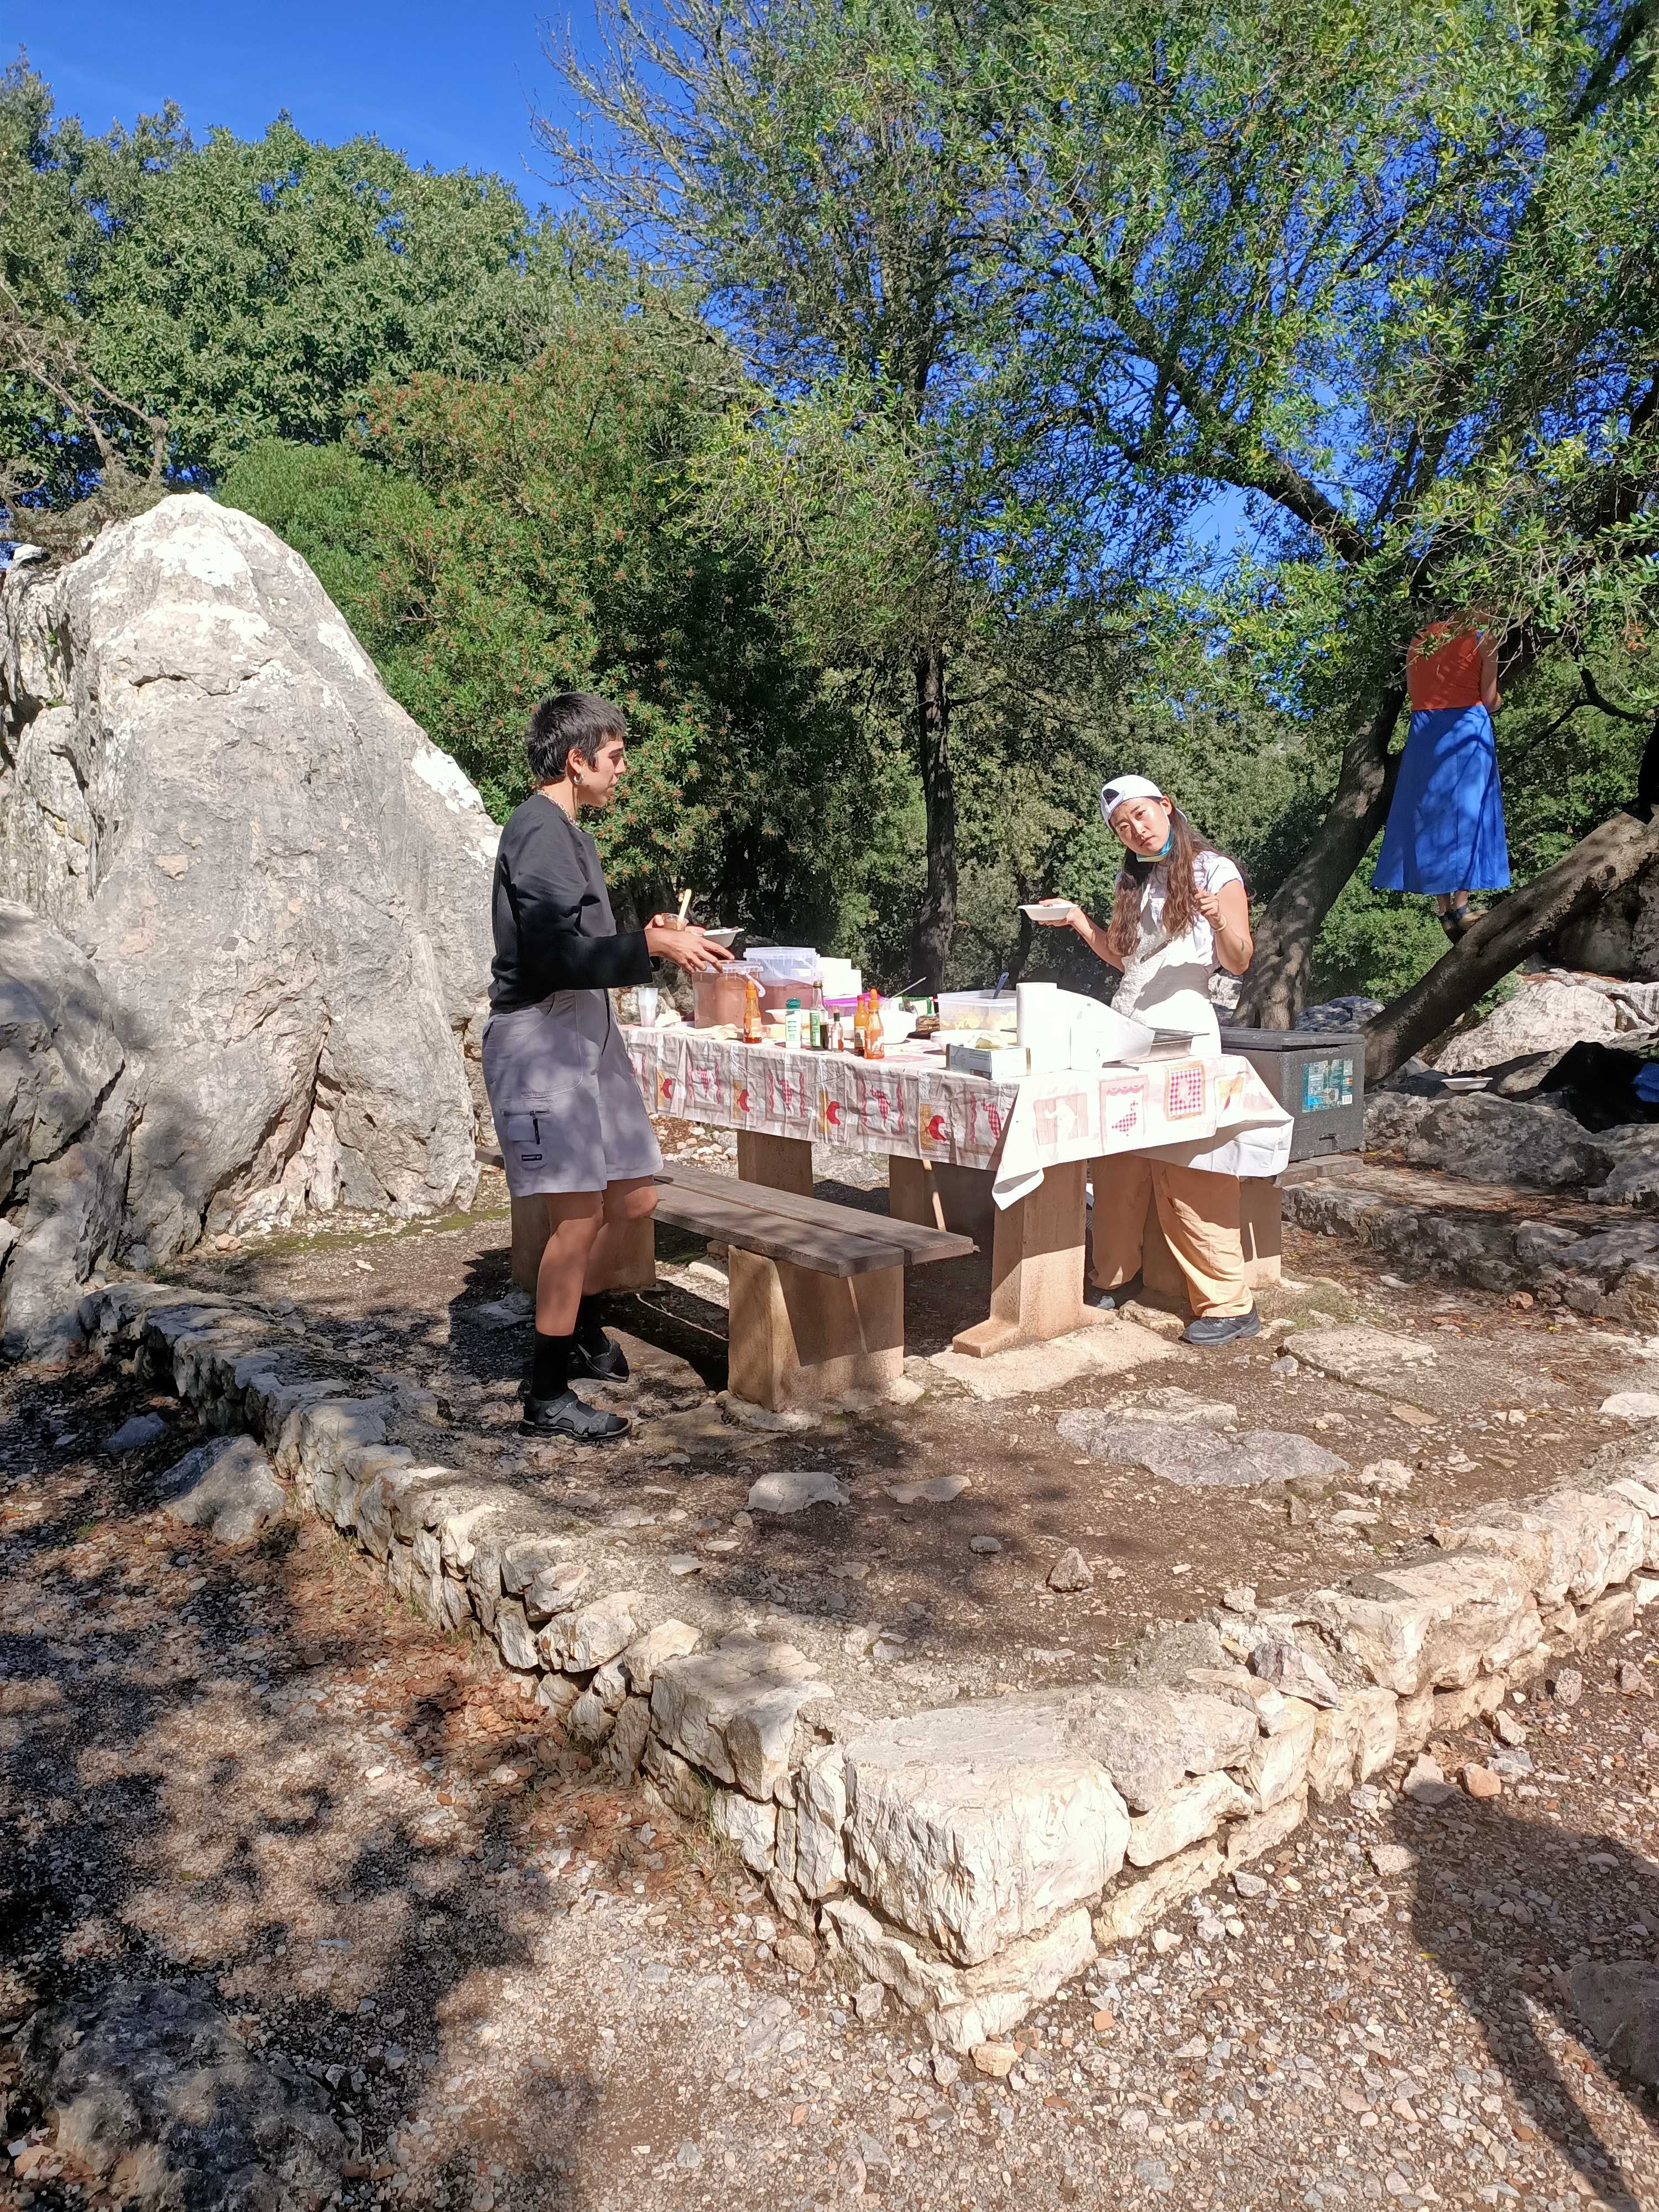  Lunch at the picnic spot @ Santuari Lluc, Mallorca. In the pic: Areumnari Ee and Ros del Olmo. October, 2021